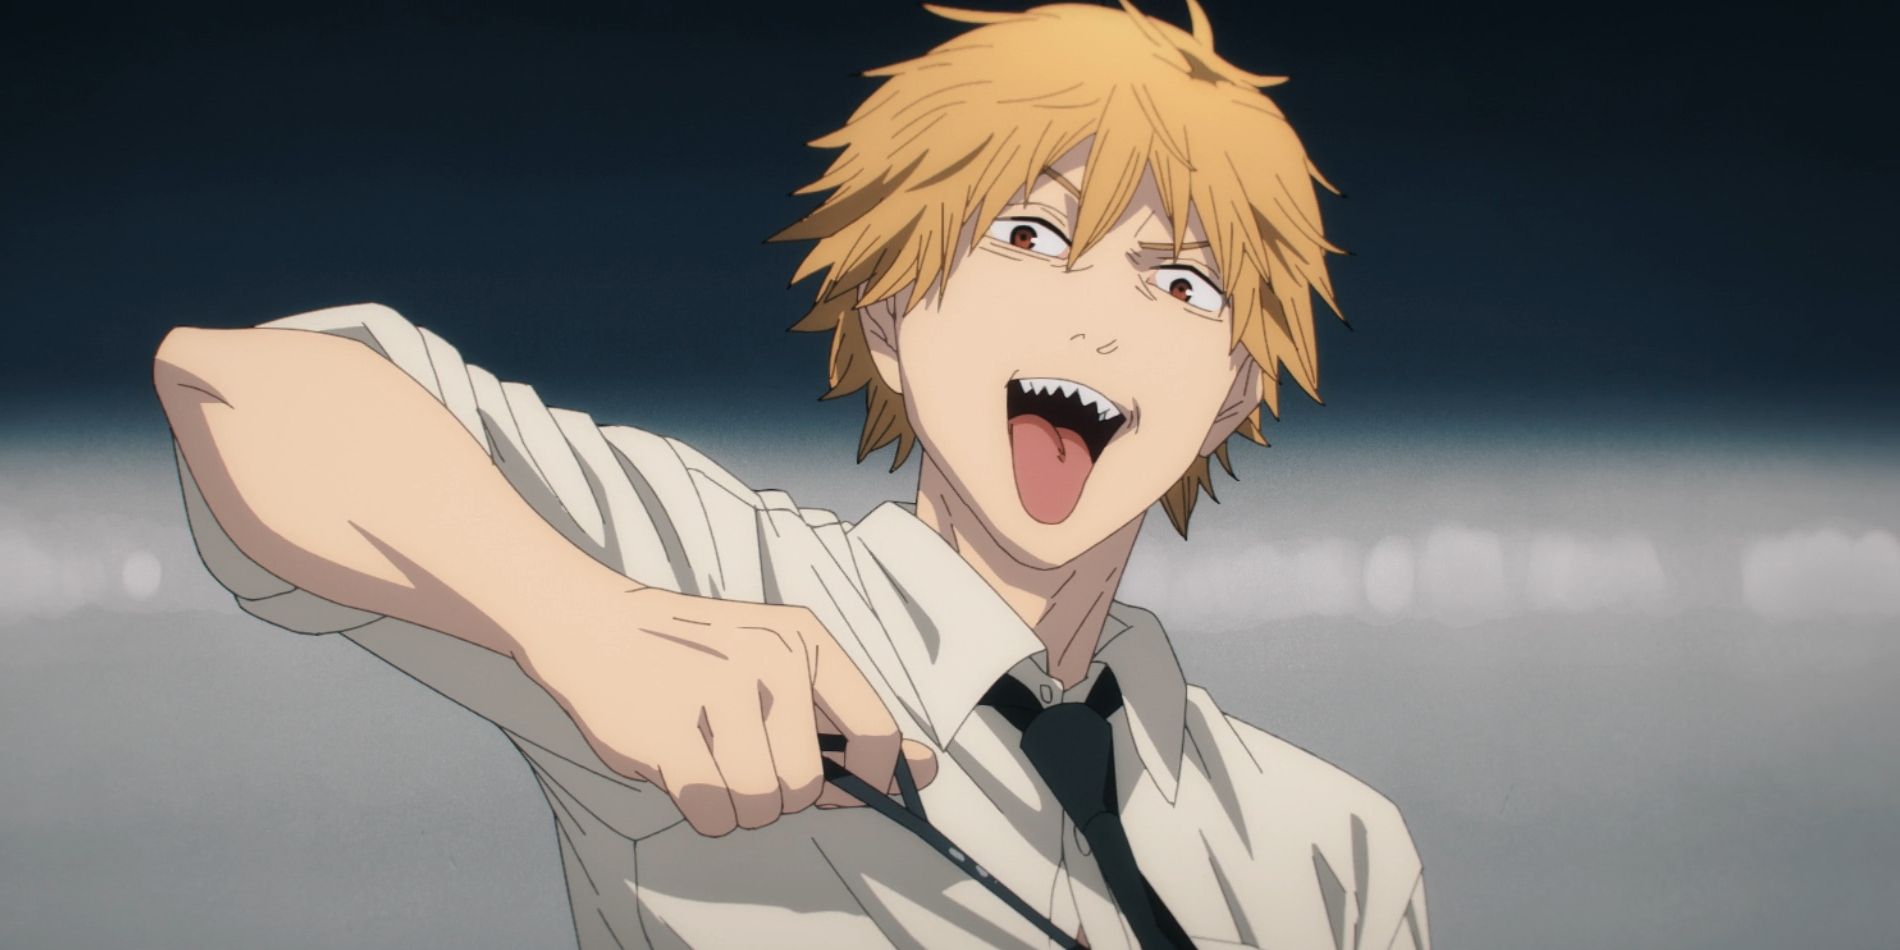 Denji tugs on his cord in the Chainsaw Man anime.